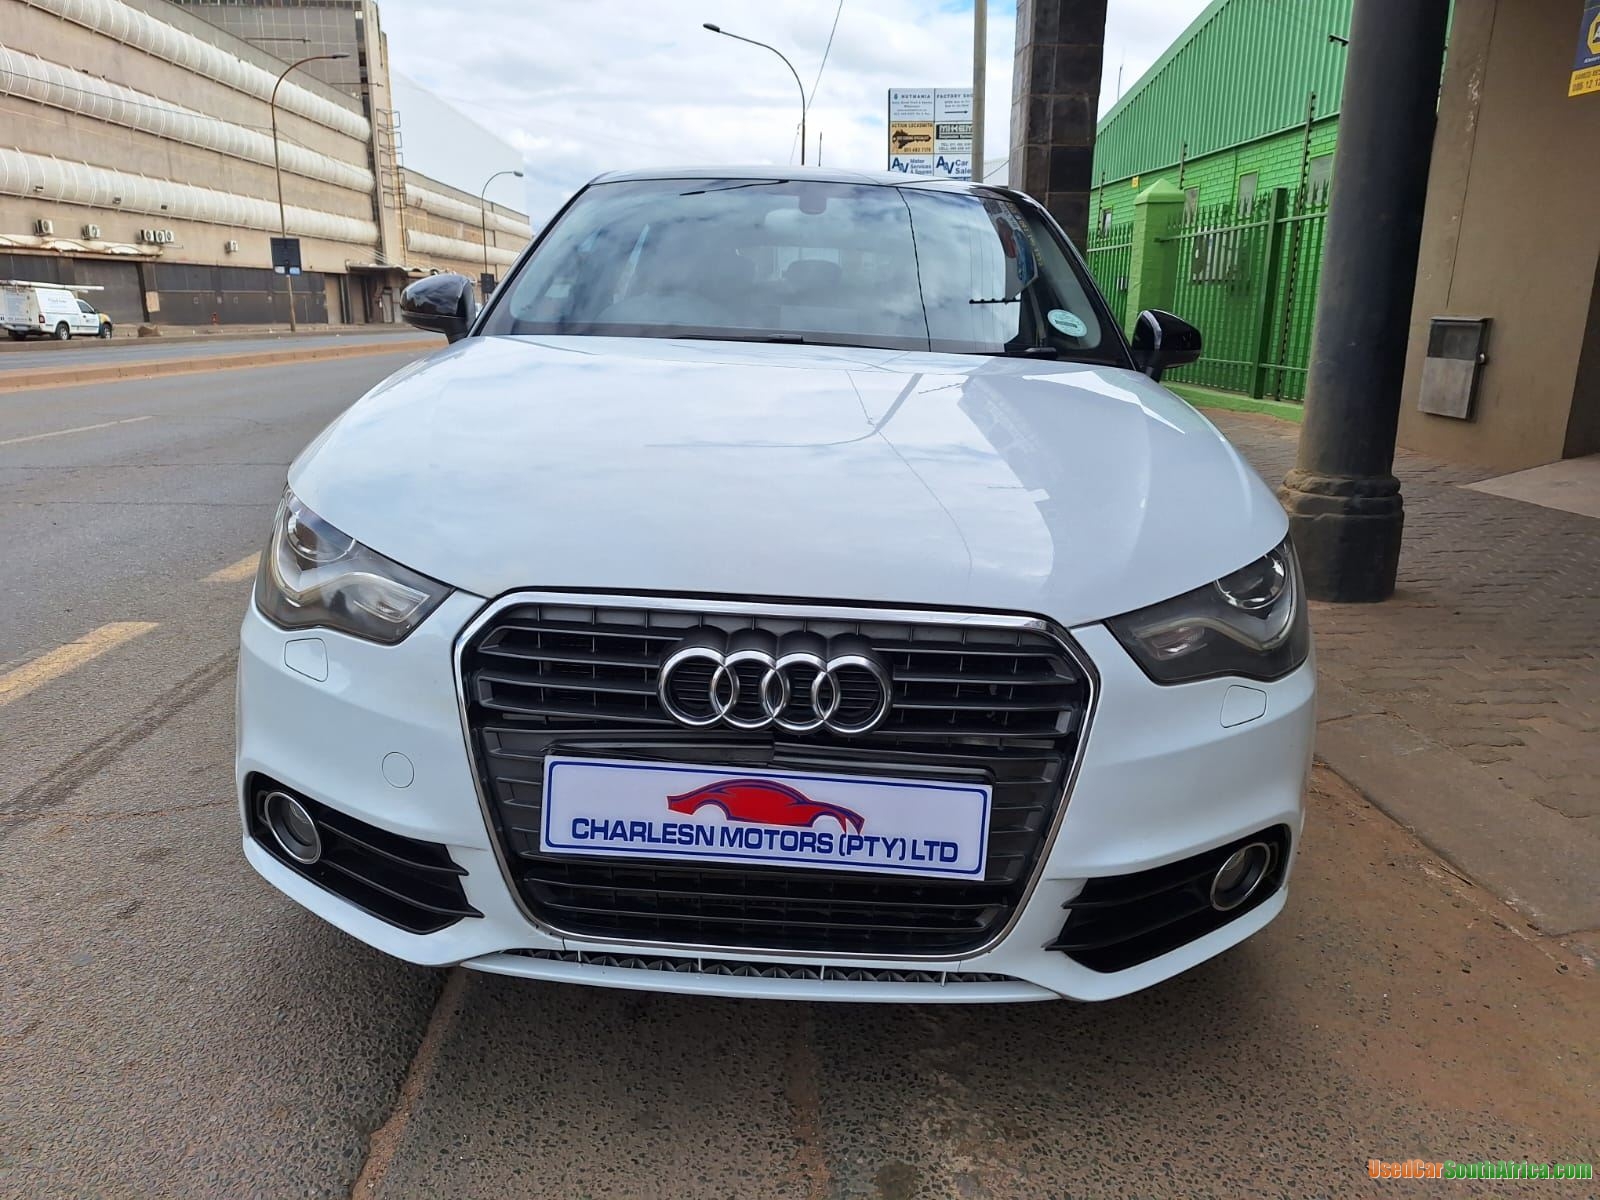 2012 Audi A1 CLEAN SECOND-HAND 2012 AUDI A1 used car for sale in Johannesburg South Gauteng South Africa - OnlyCars.co.za